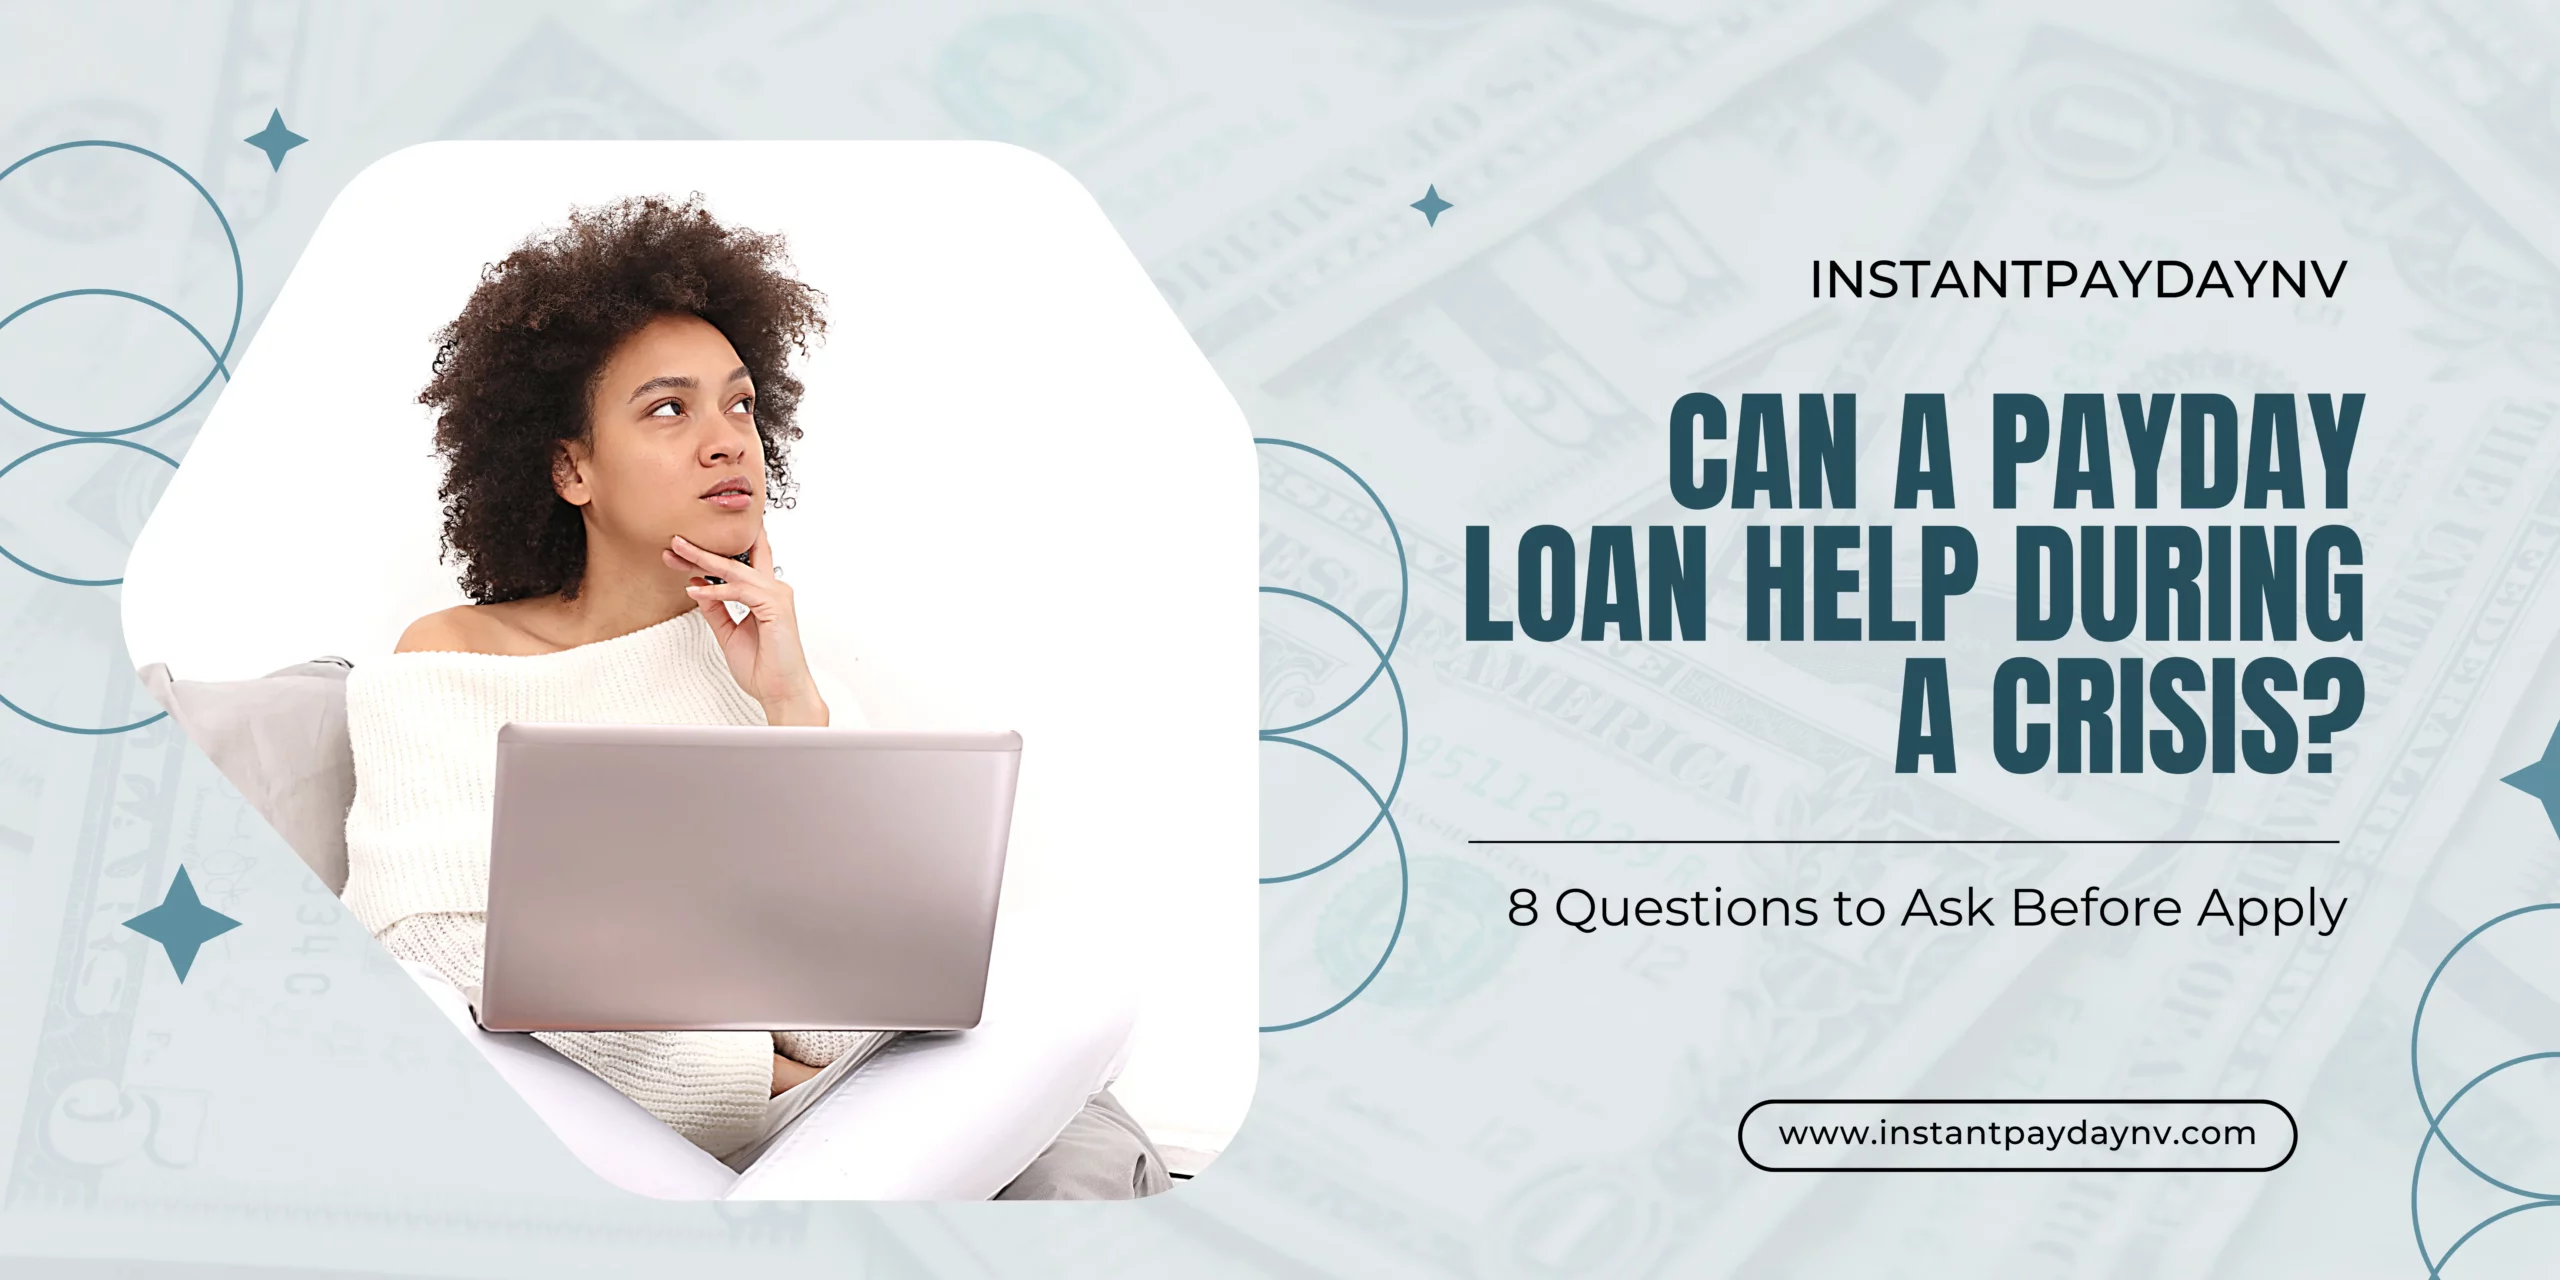 Can a Payday Loan Help During a Crisis